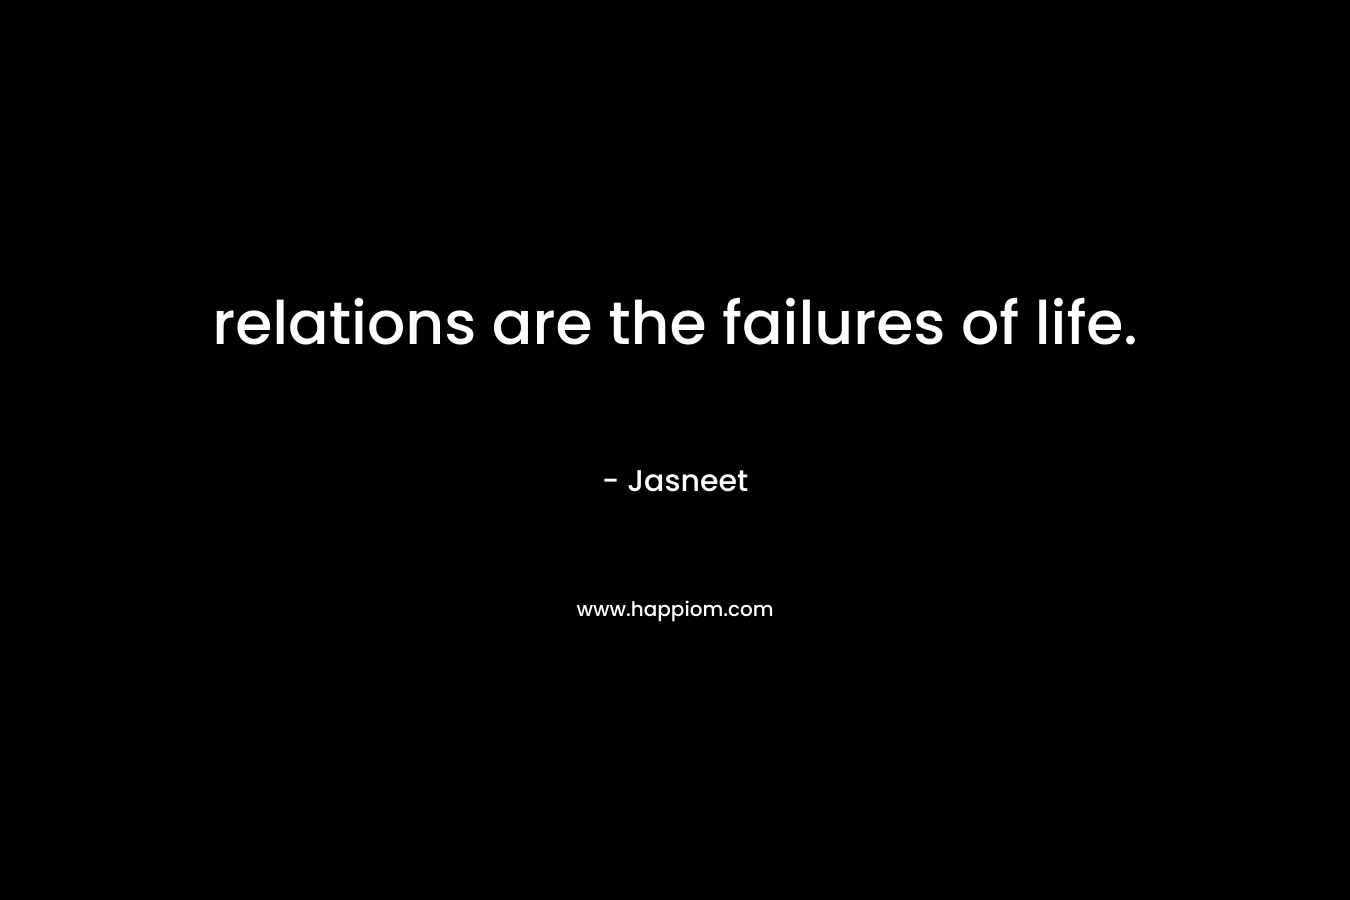 relations are the failures of life.